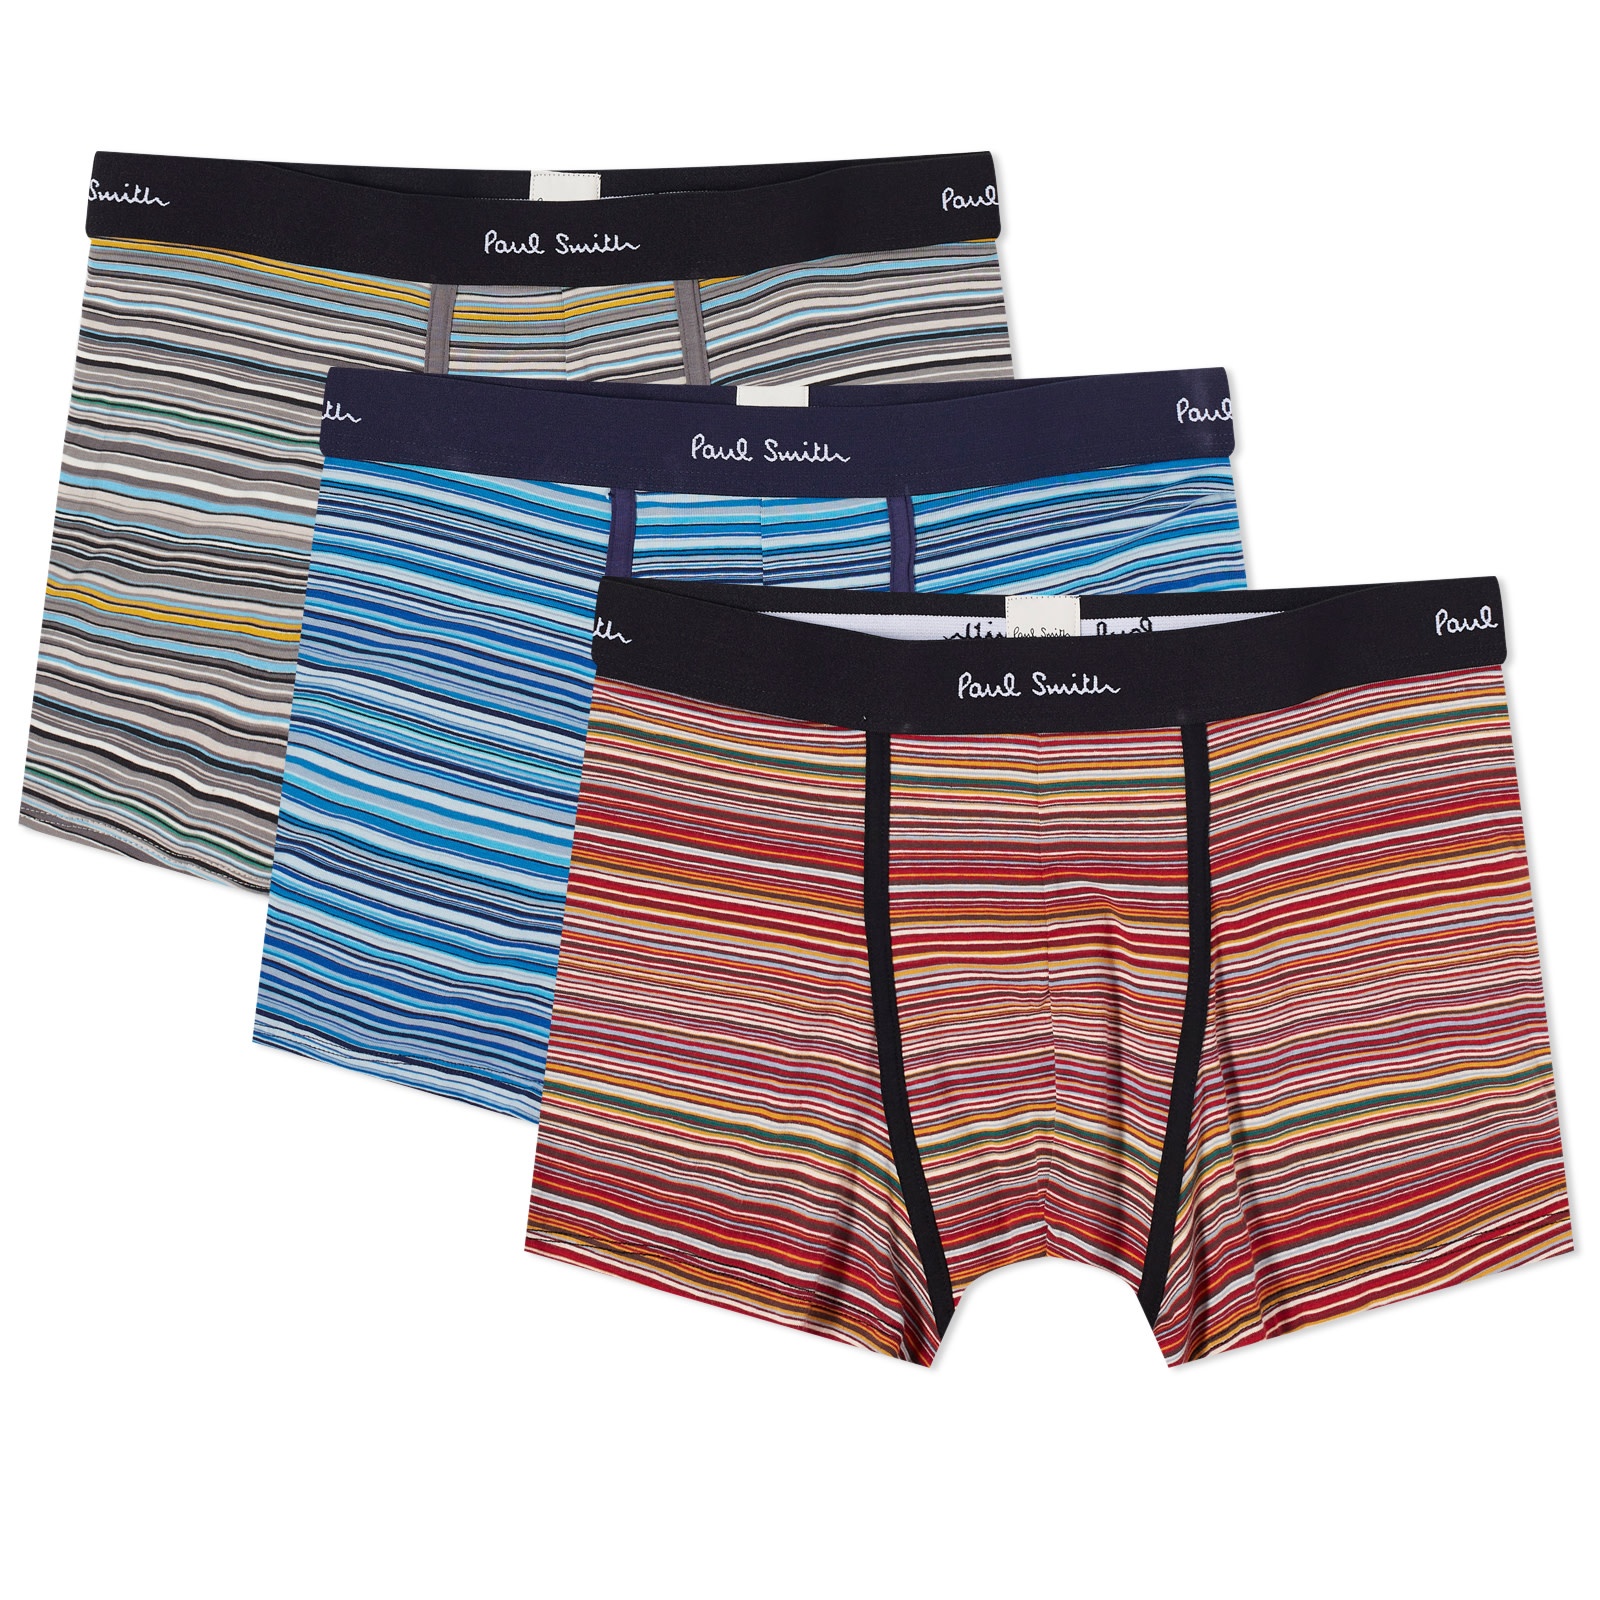 Paul Smith Trunk - 3 Pack - 1